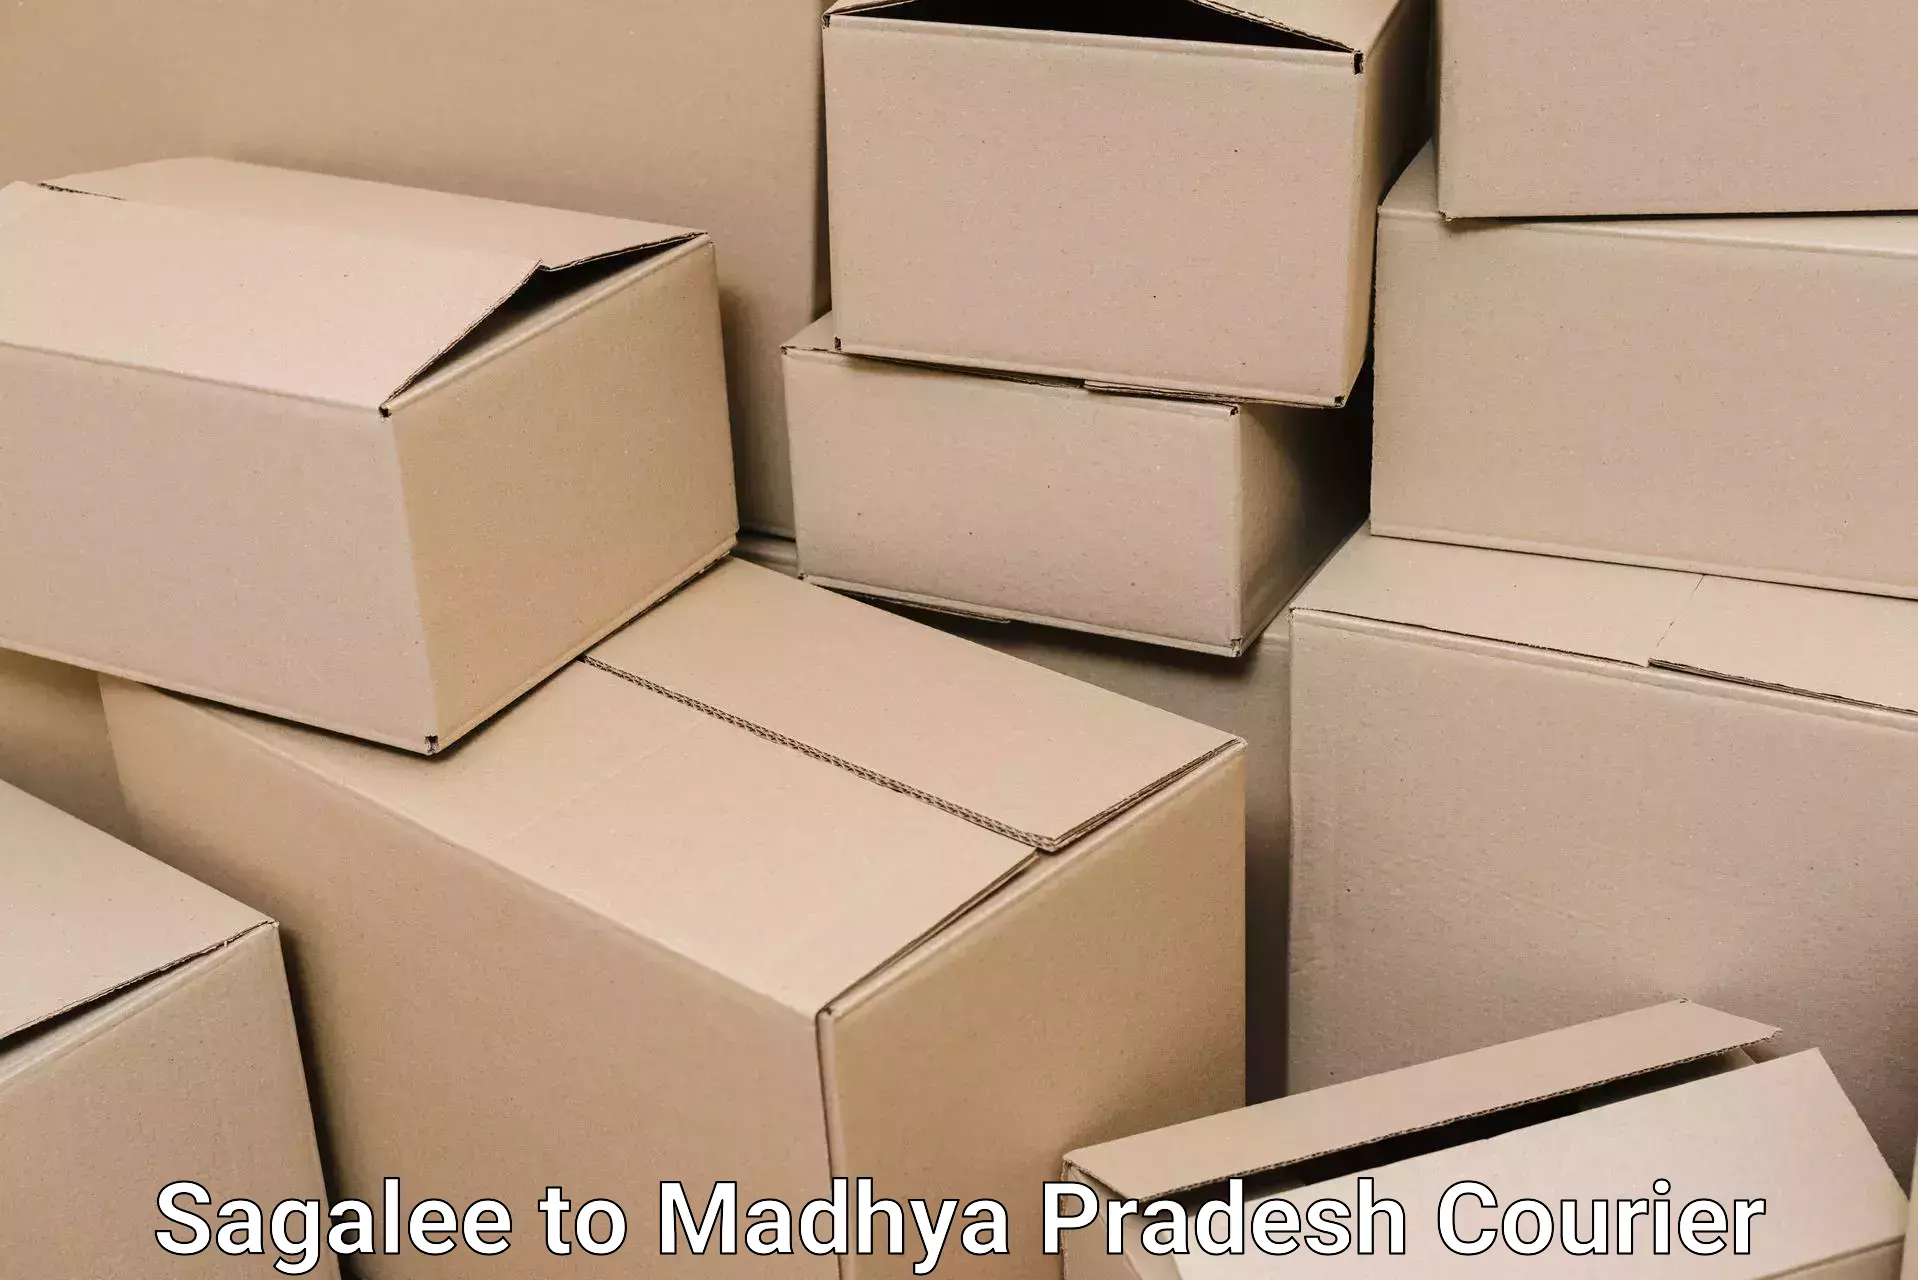 Quality moving services in Sagalee to Nalkheda